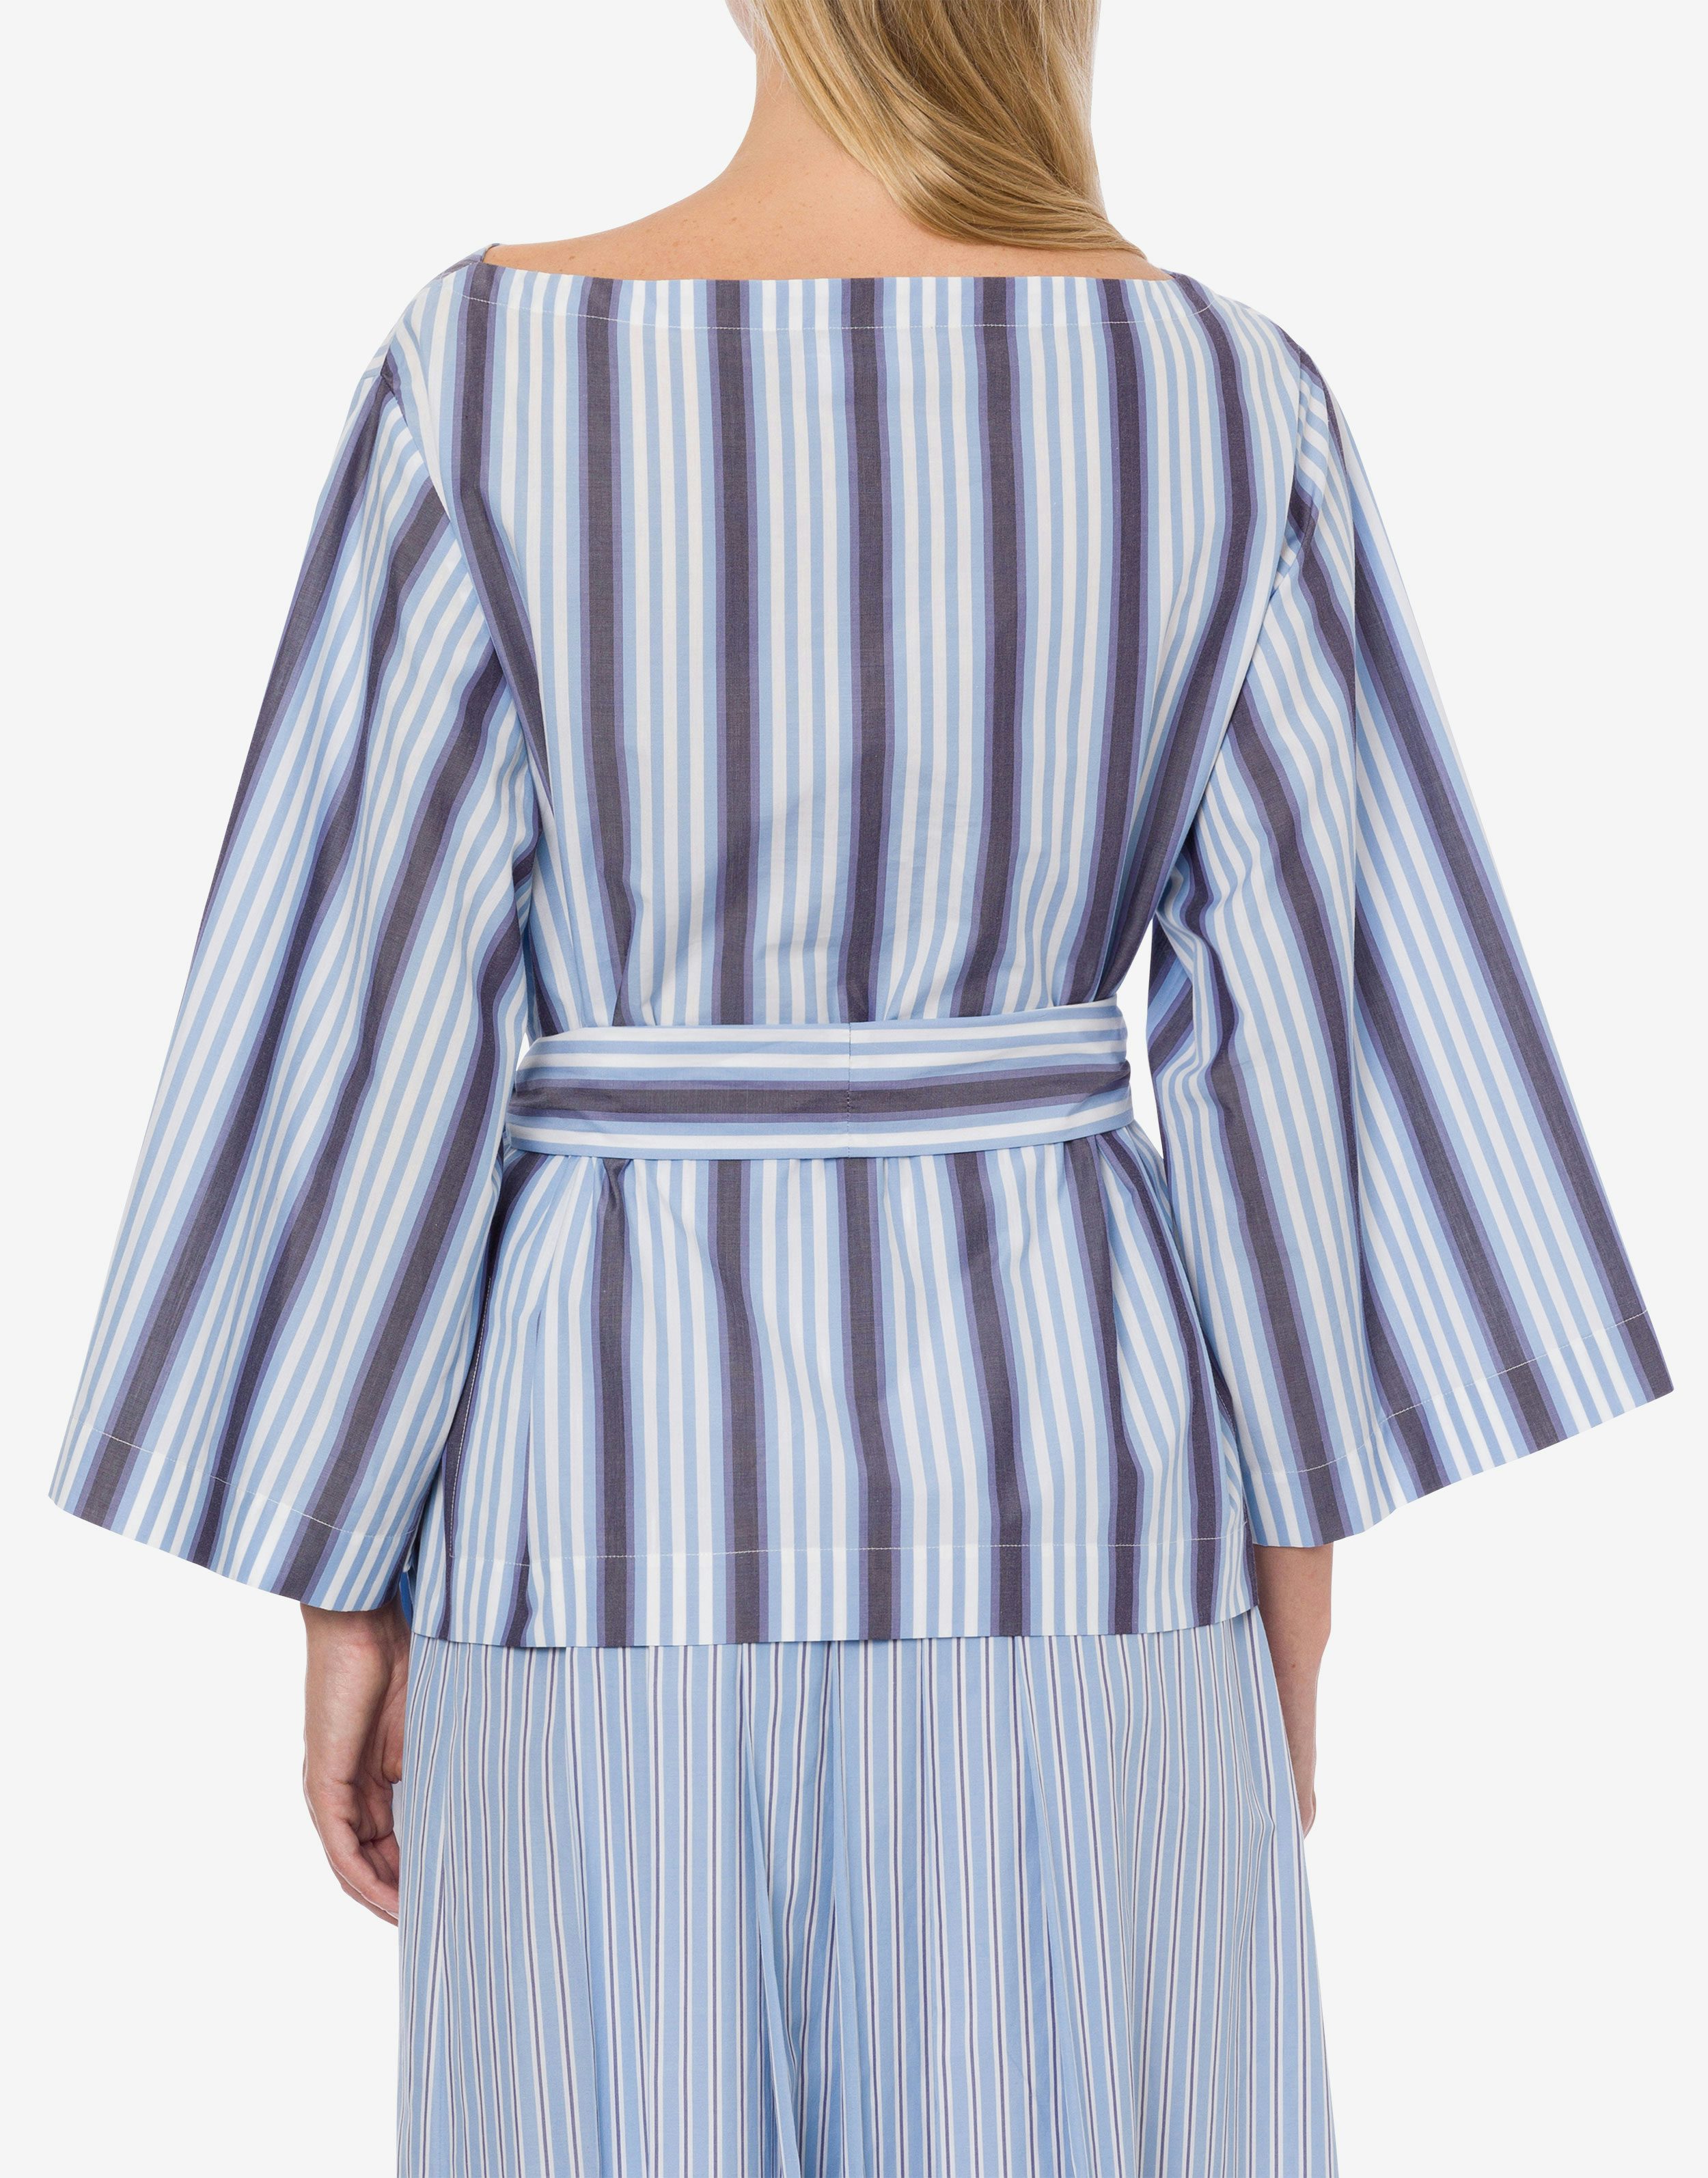 Blouse in striped poplin with sash 3